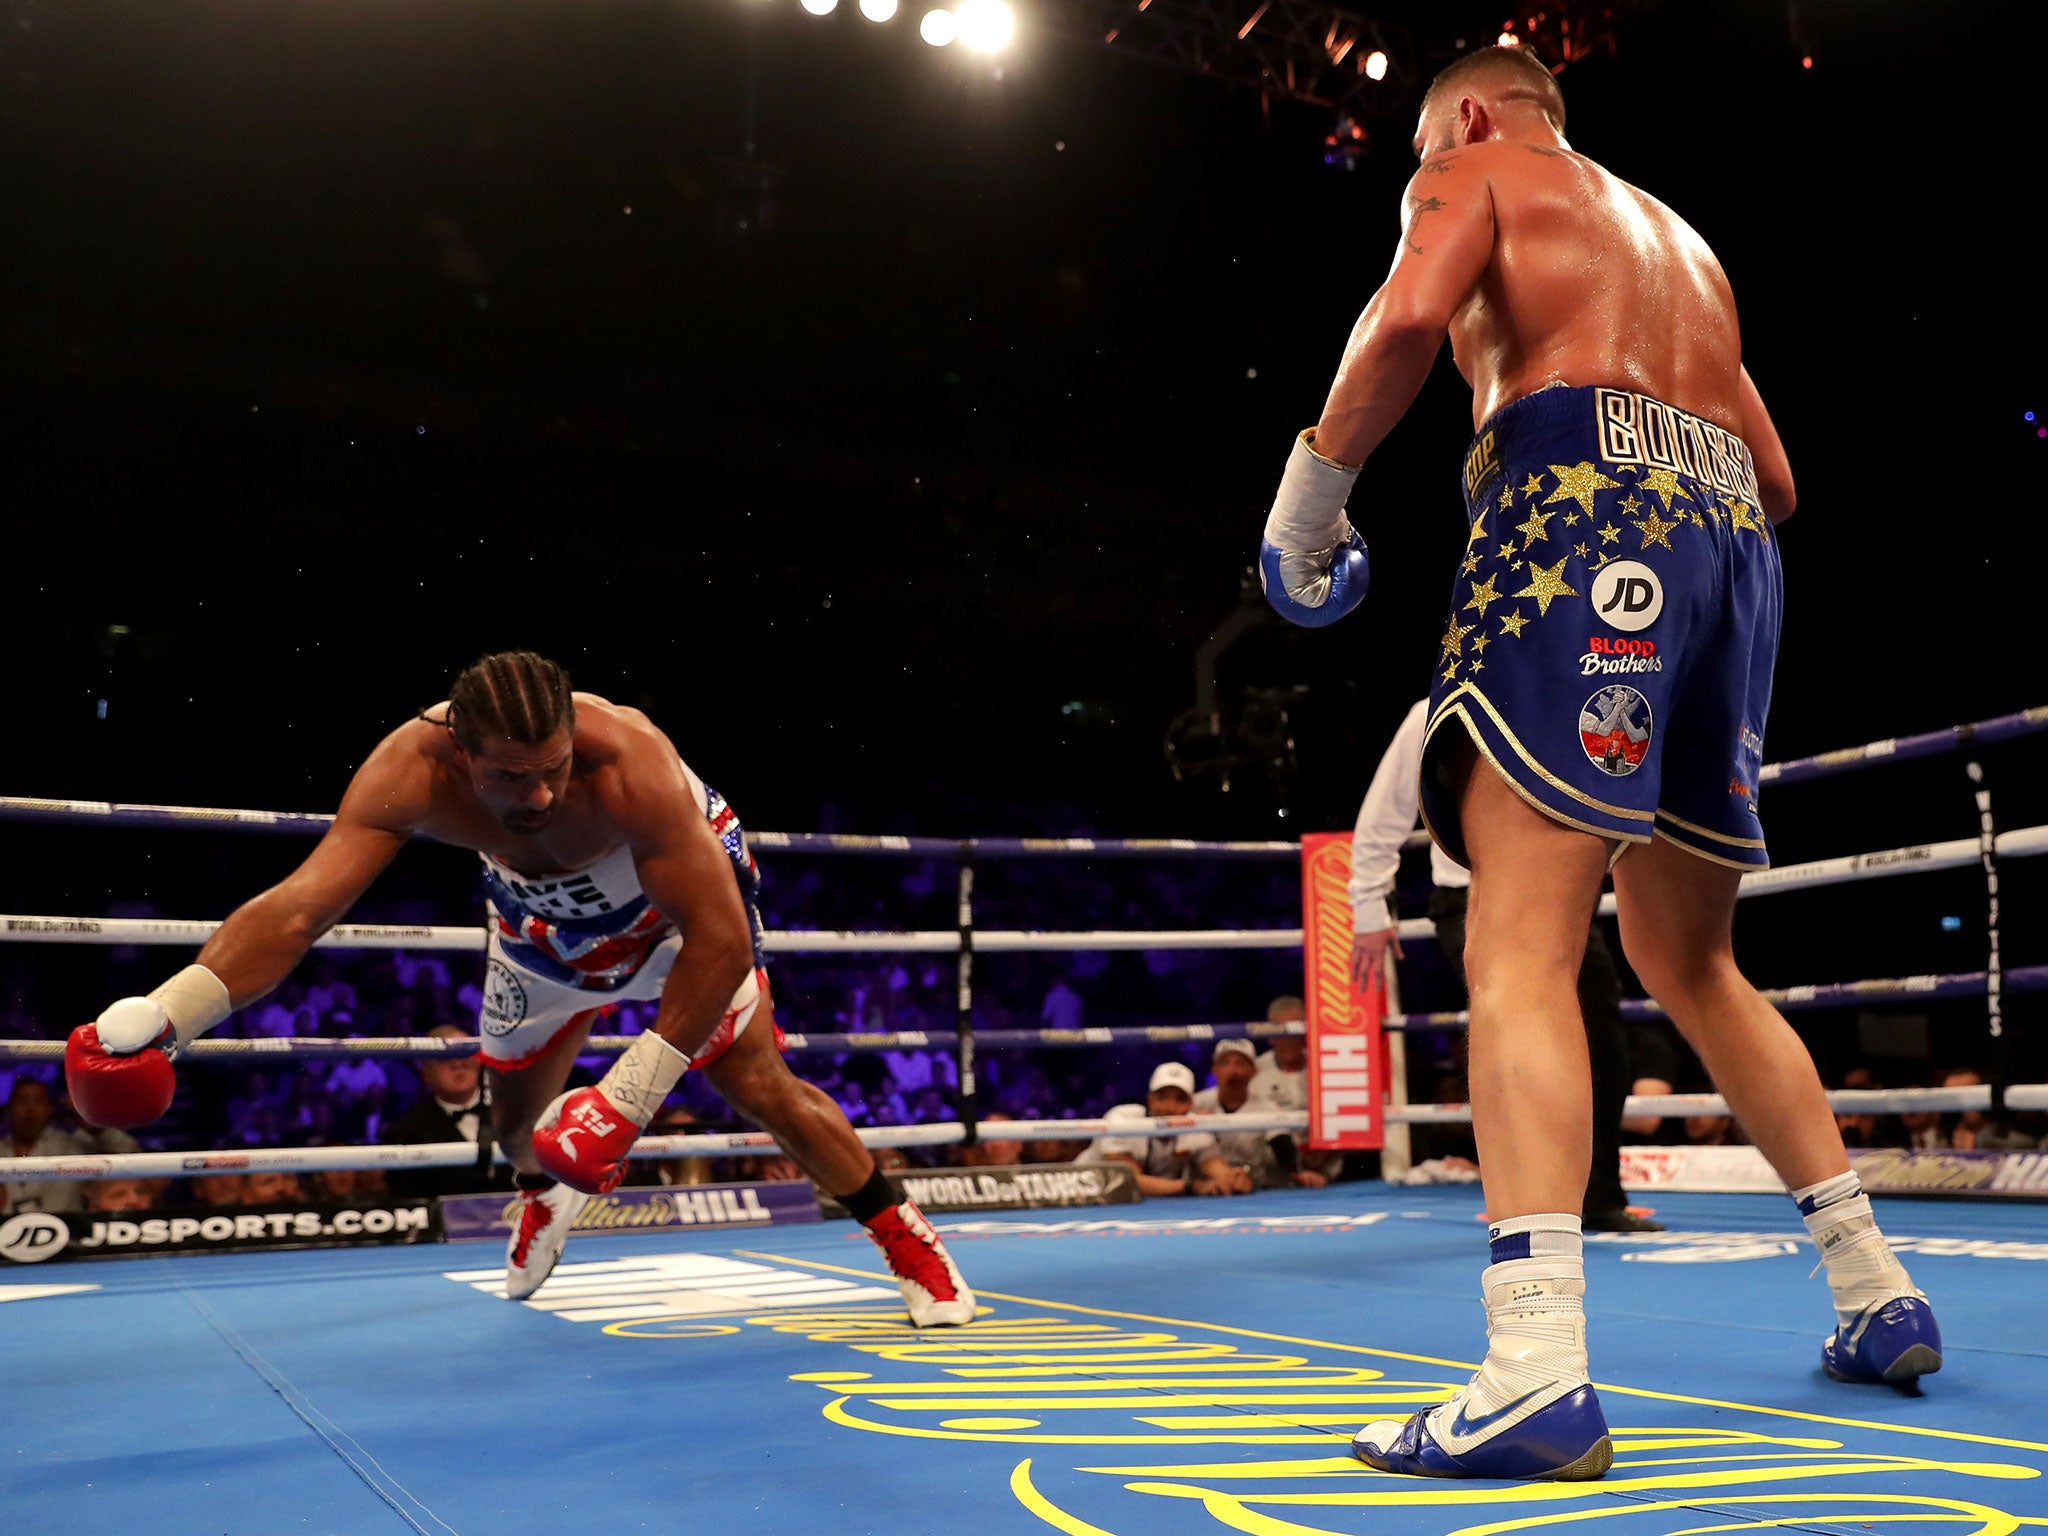 Bellew knocked Haye out in the fifth round